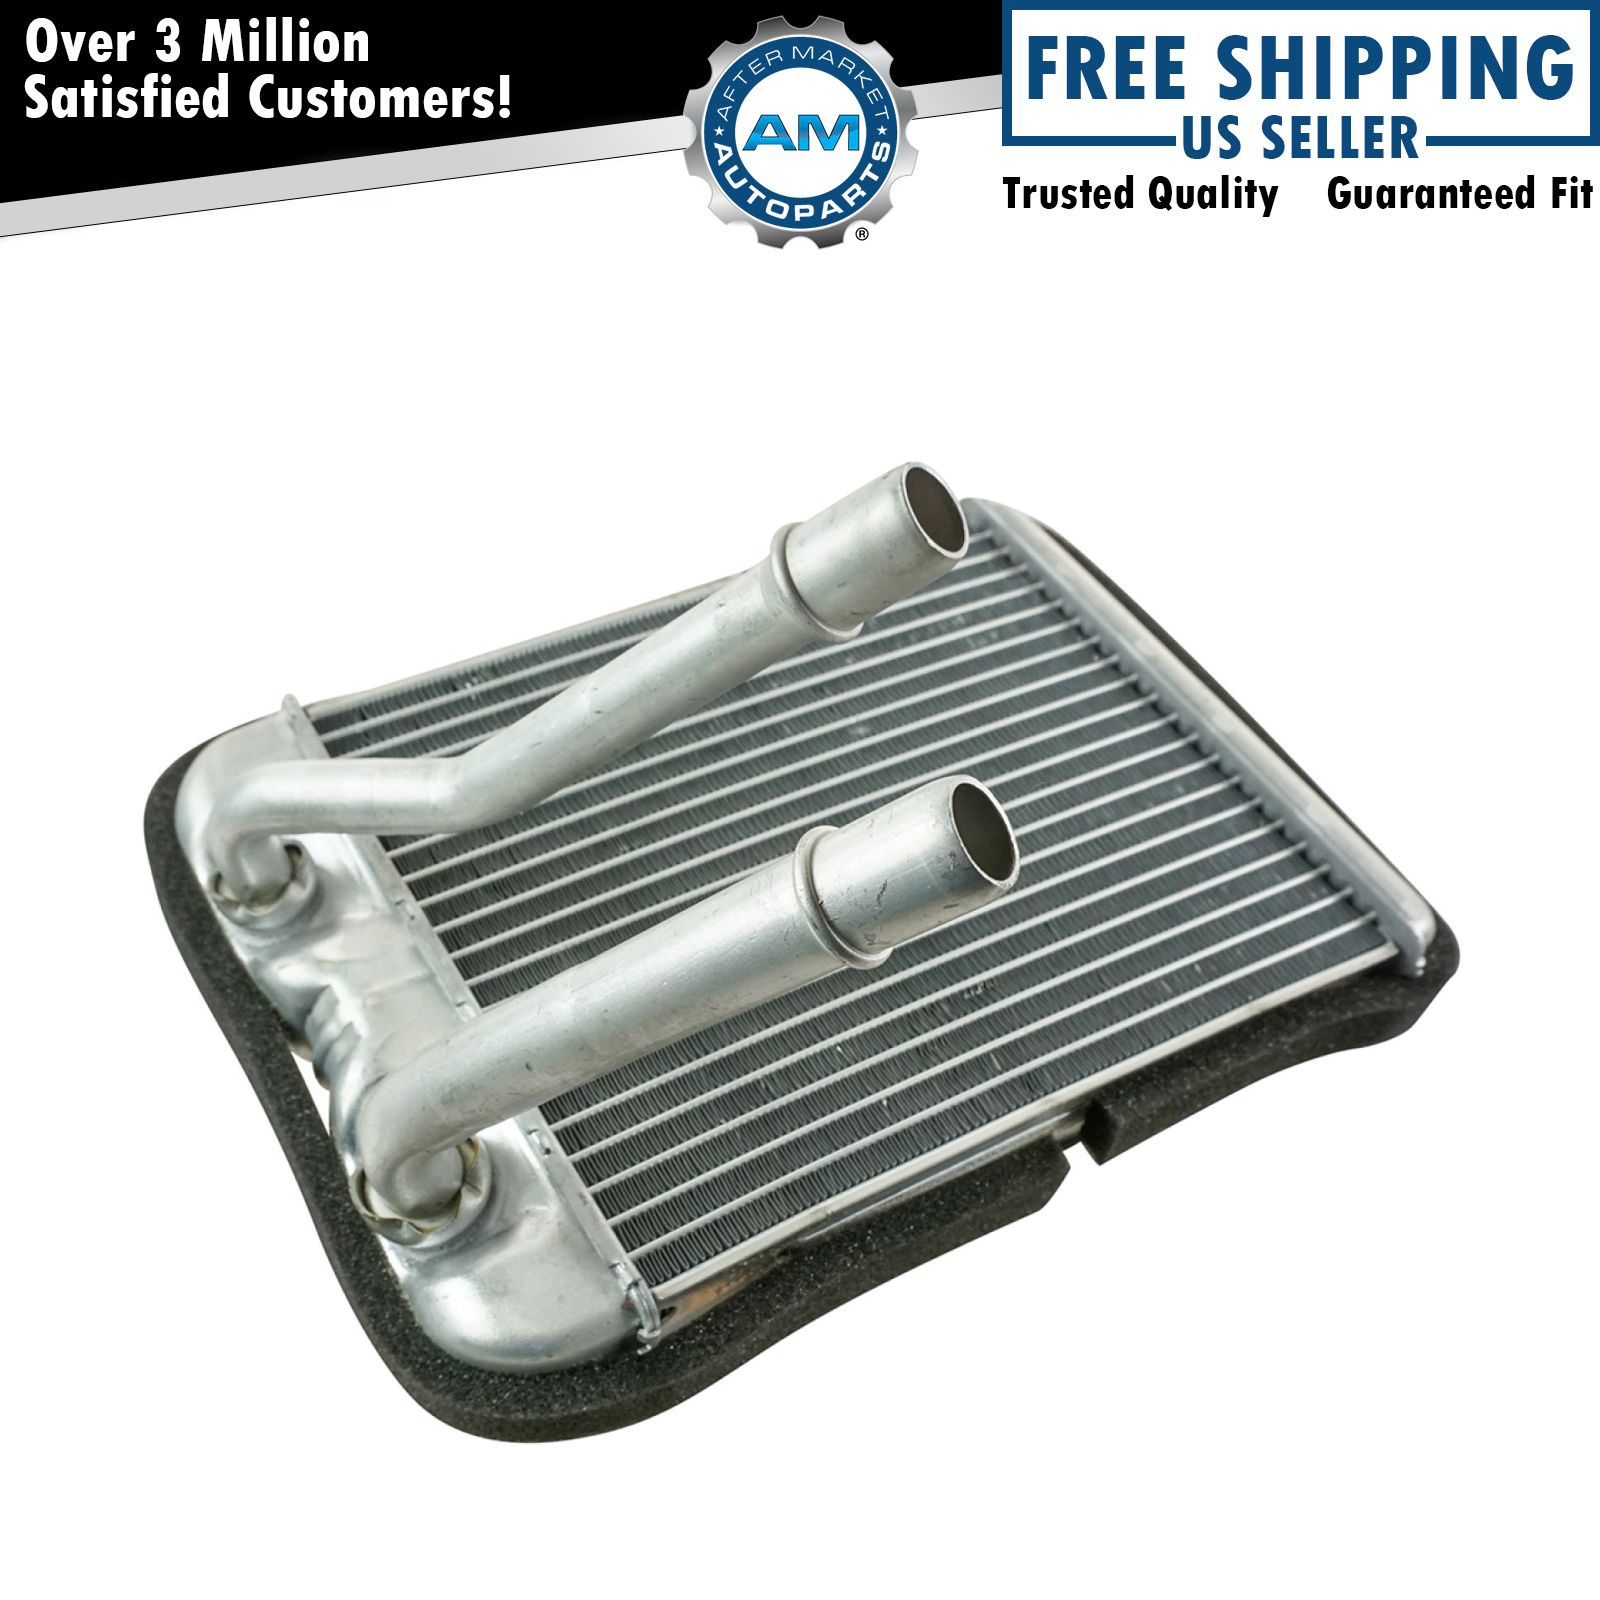 Air Conditioning A/C Heat Heater Core Assembly for Chevy GMC Pickup Truck SUV